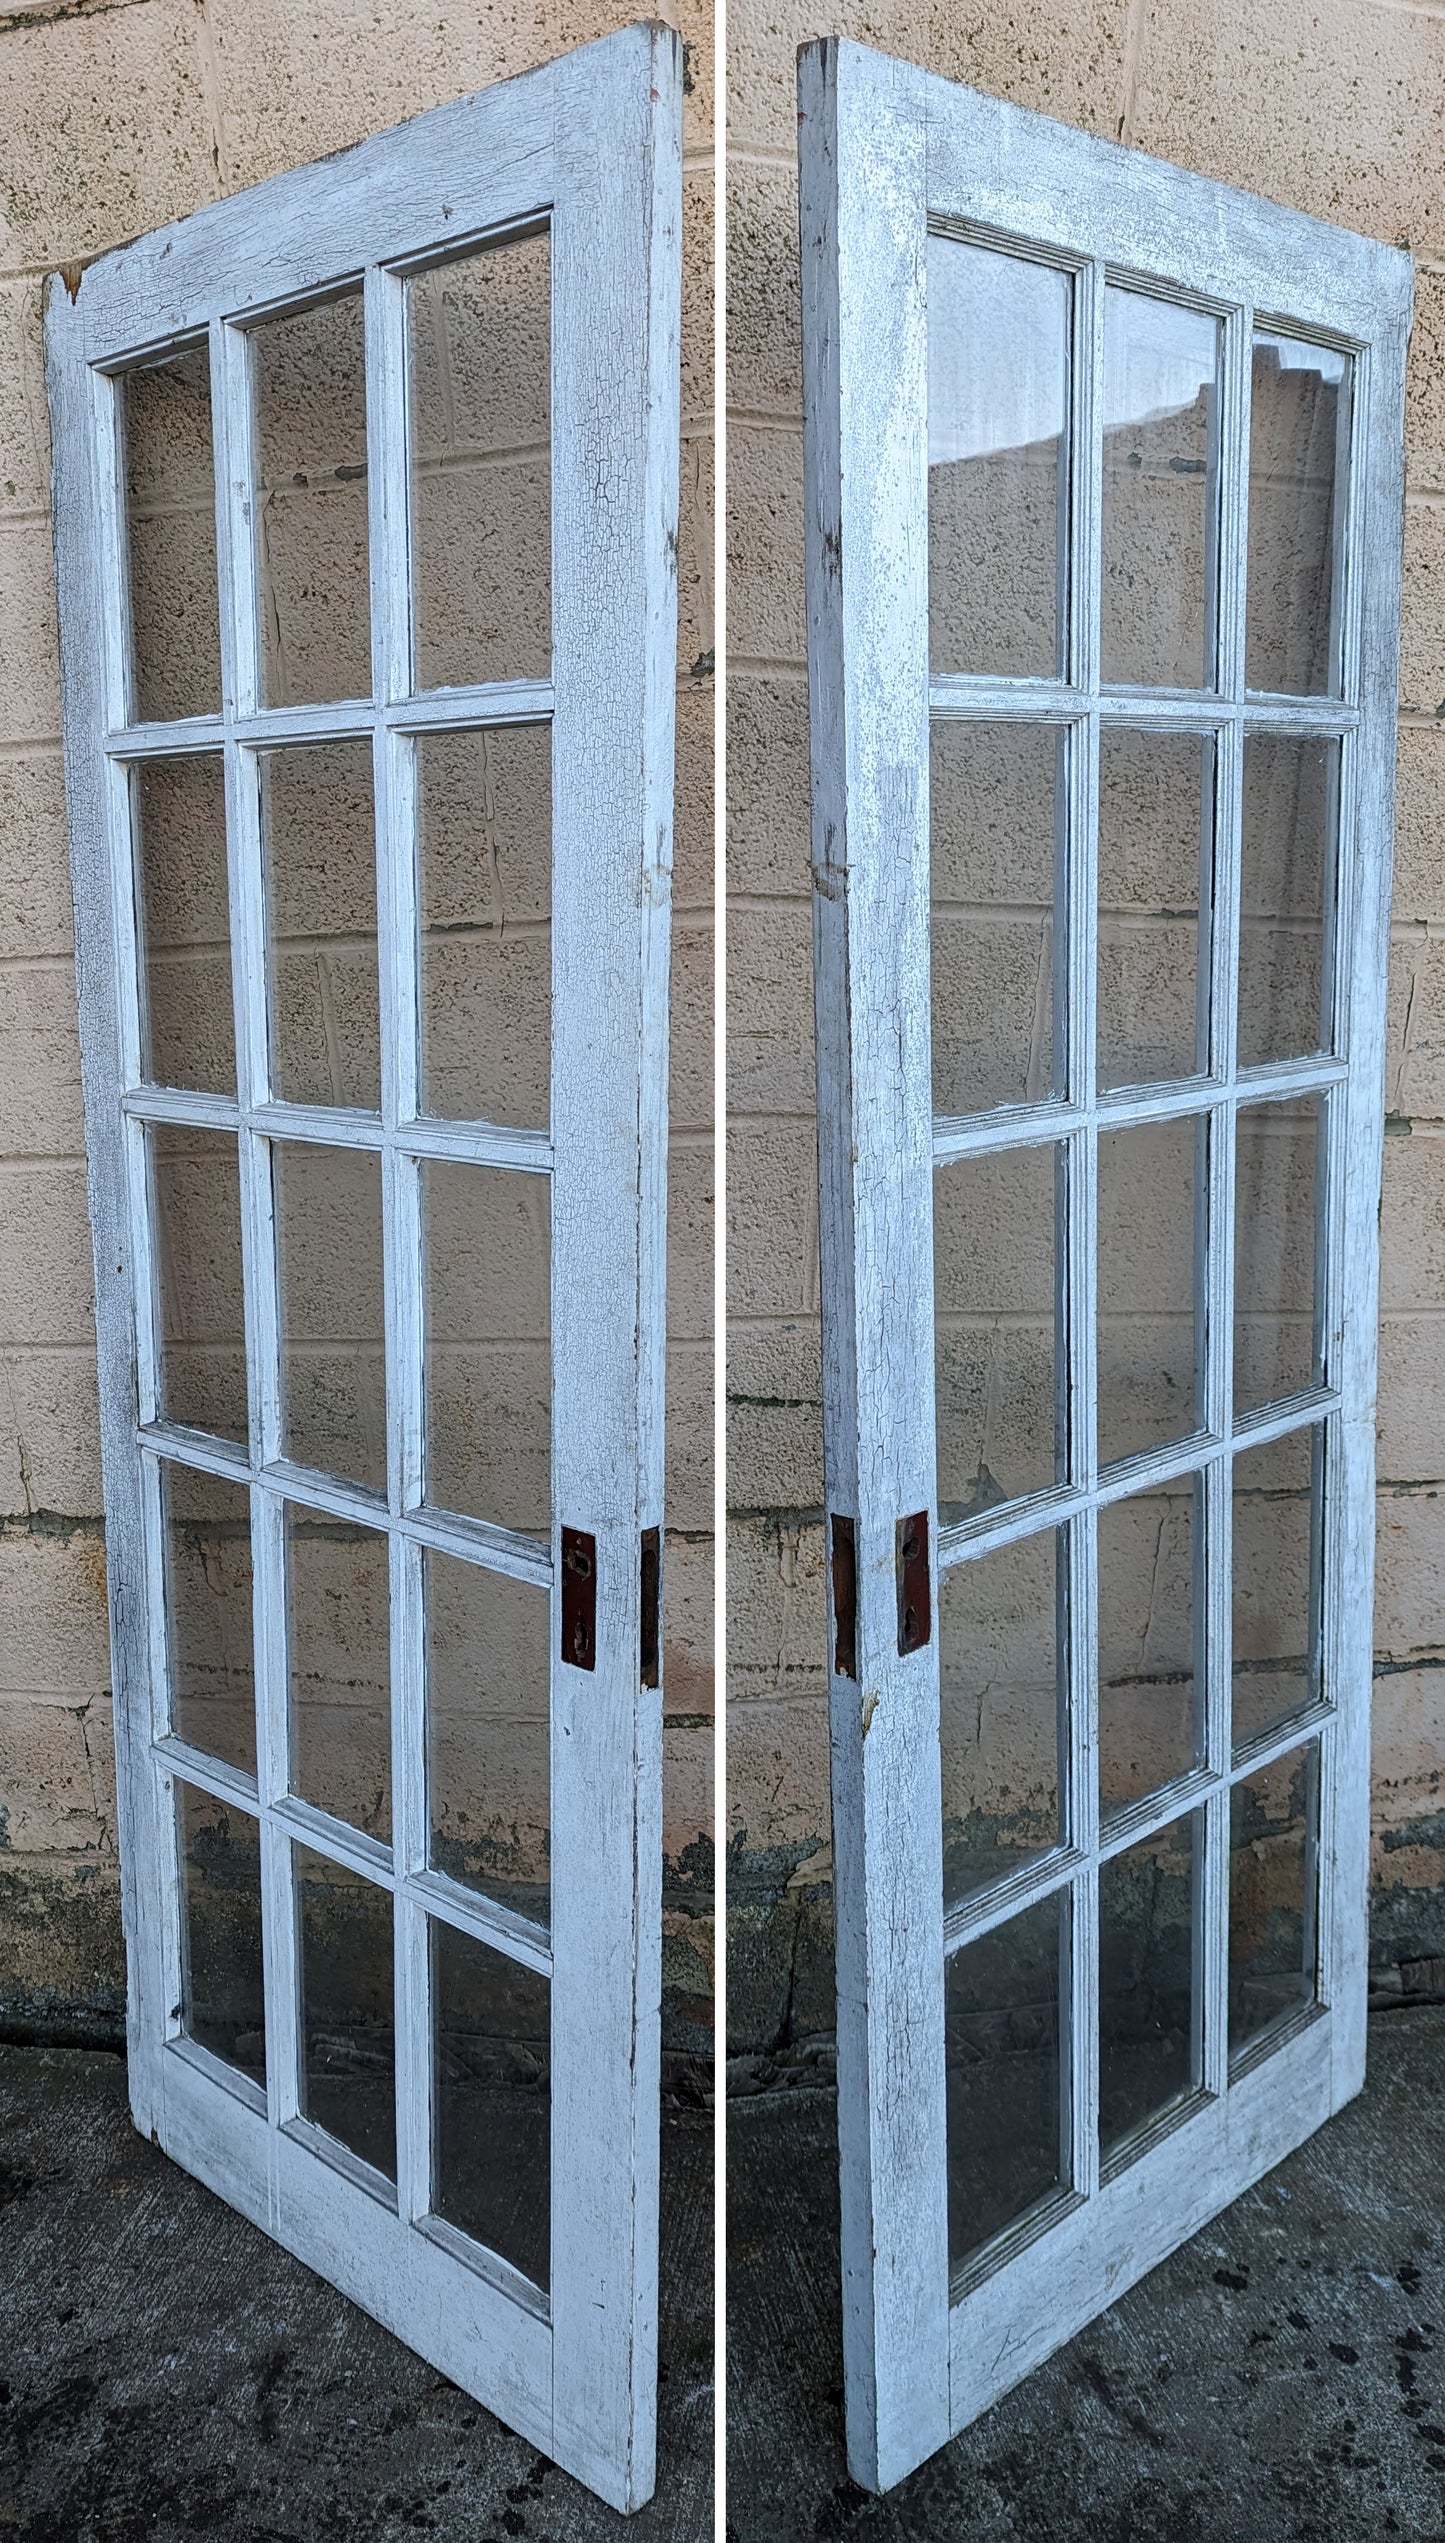 30"x75" Antique Vintage Old Reclaimed Salvaged Wood Wooden Exterior French Door Window Wavy Glass